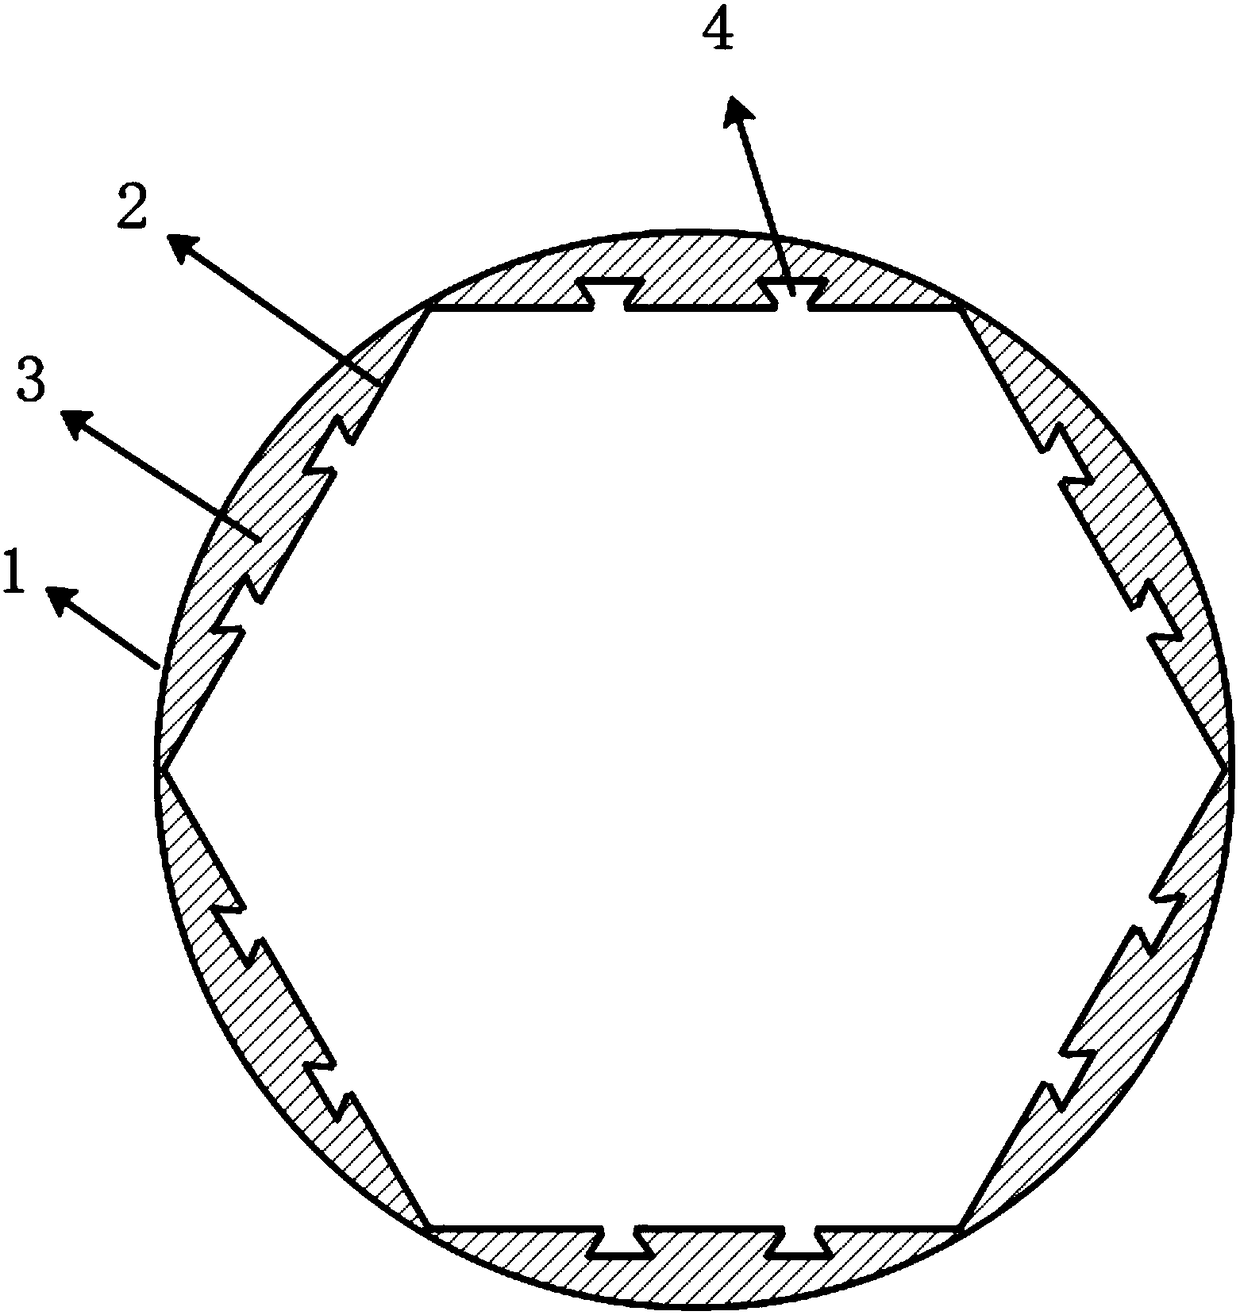 Polygonal barrel and protective device for space telescope lens